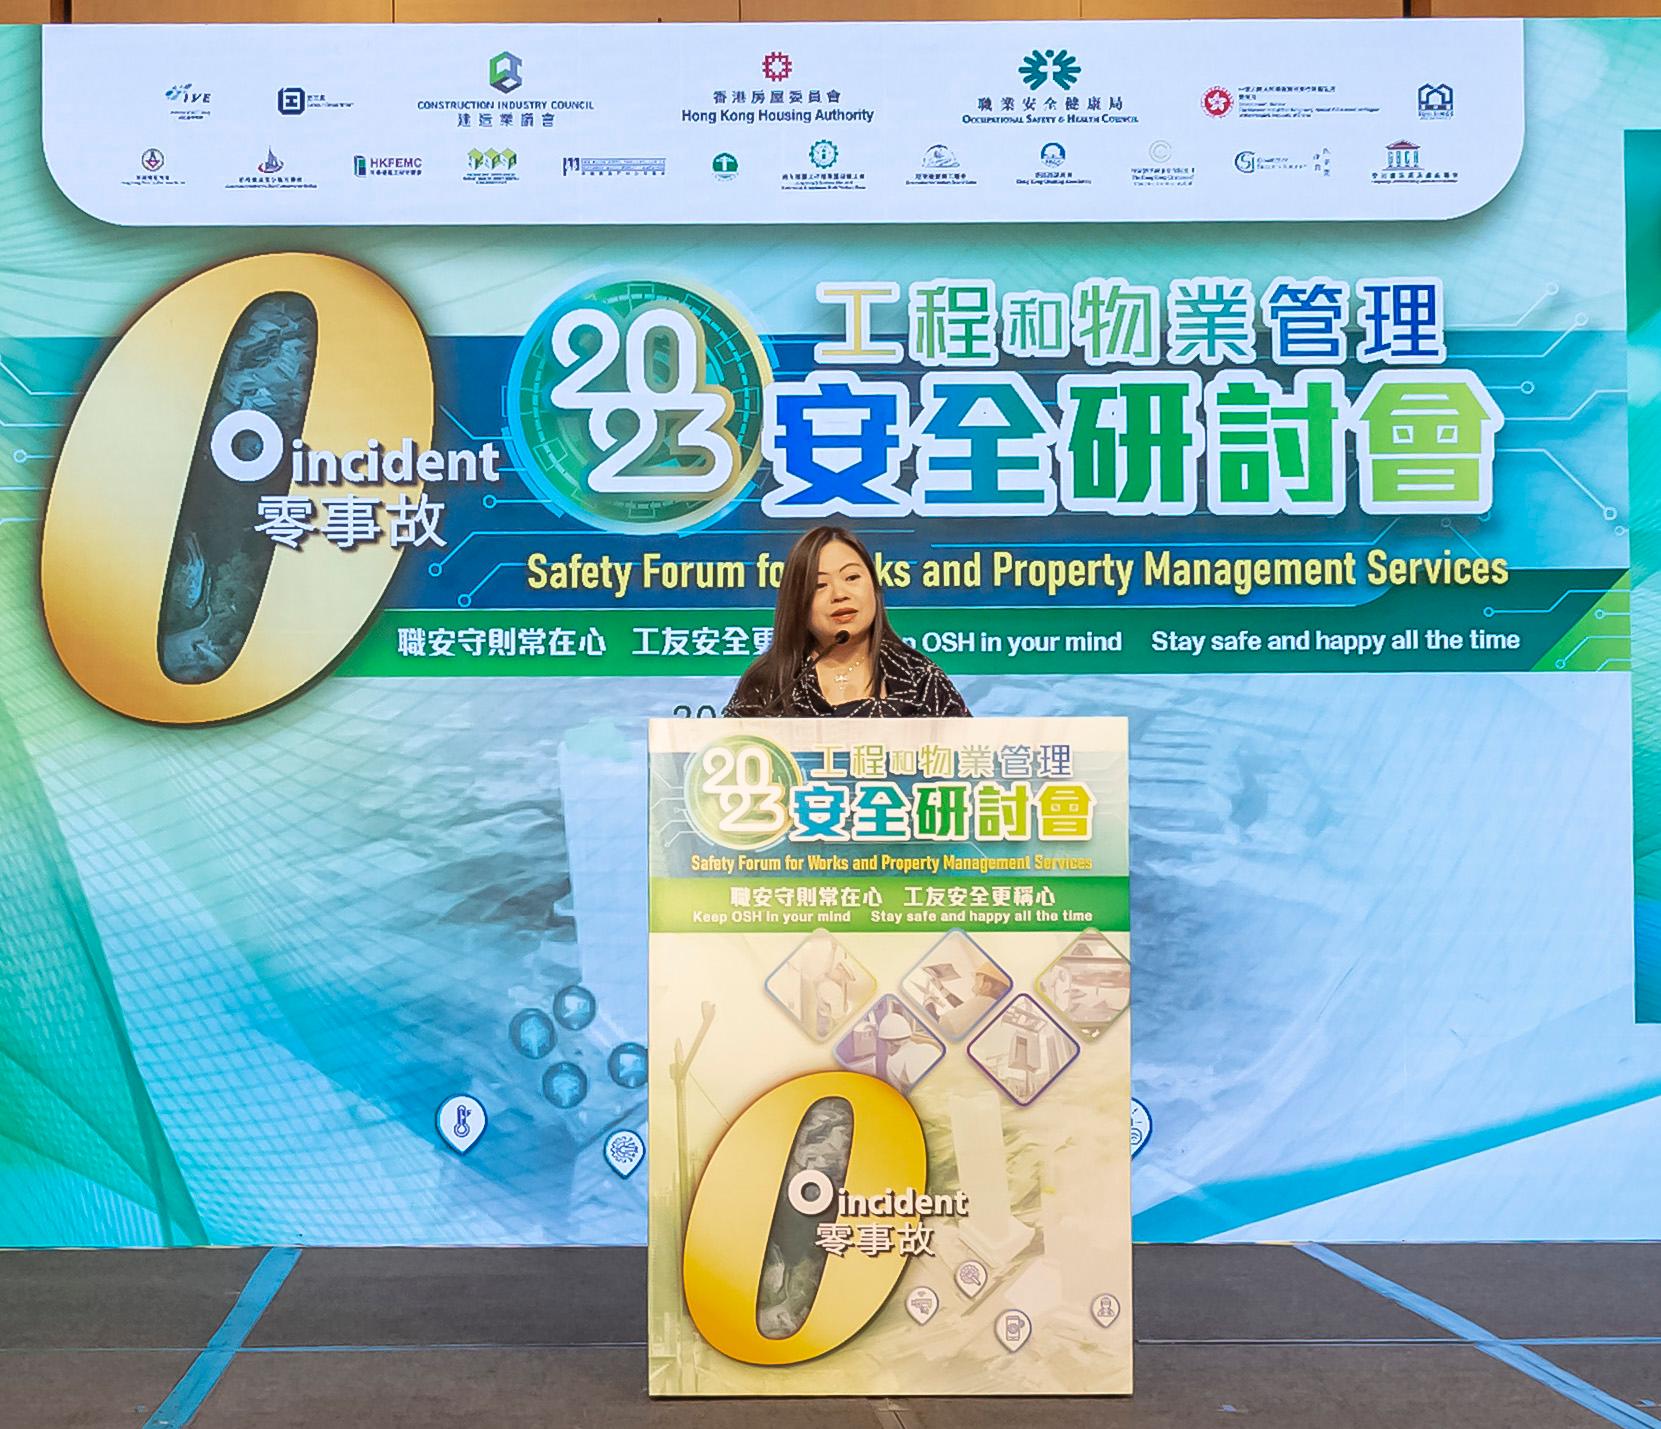 The Permanent Secretary for Housing, Miss Rosanna Law, said at the Safety Forum for Works and Property Management Services 2023 today (September 28) that the Hong Kong Housing Authority will apply more smart technologies which will facilitate the strengthening of site safety supervision and collection of data for continuous enhancement of safety measures.